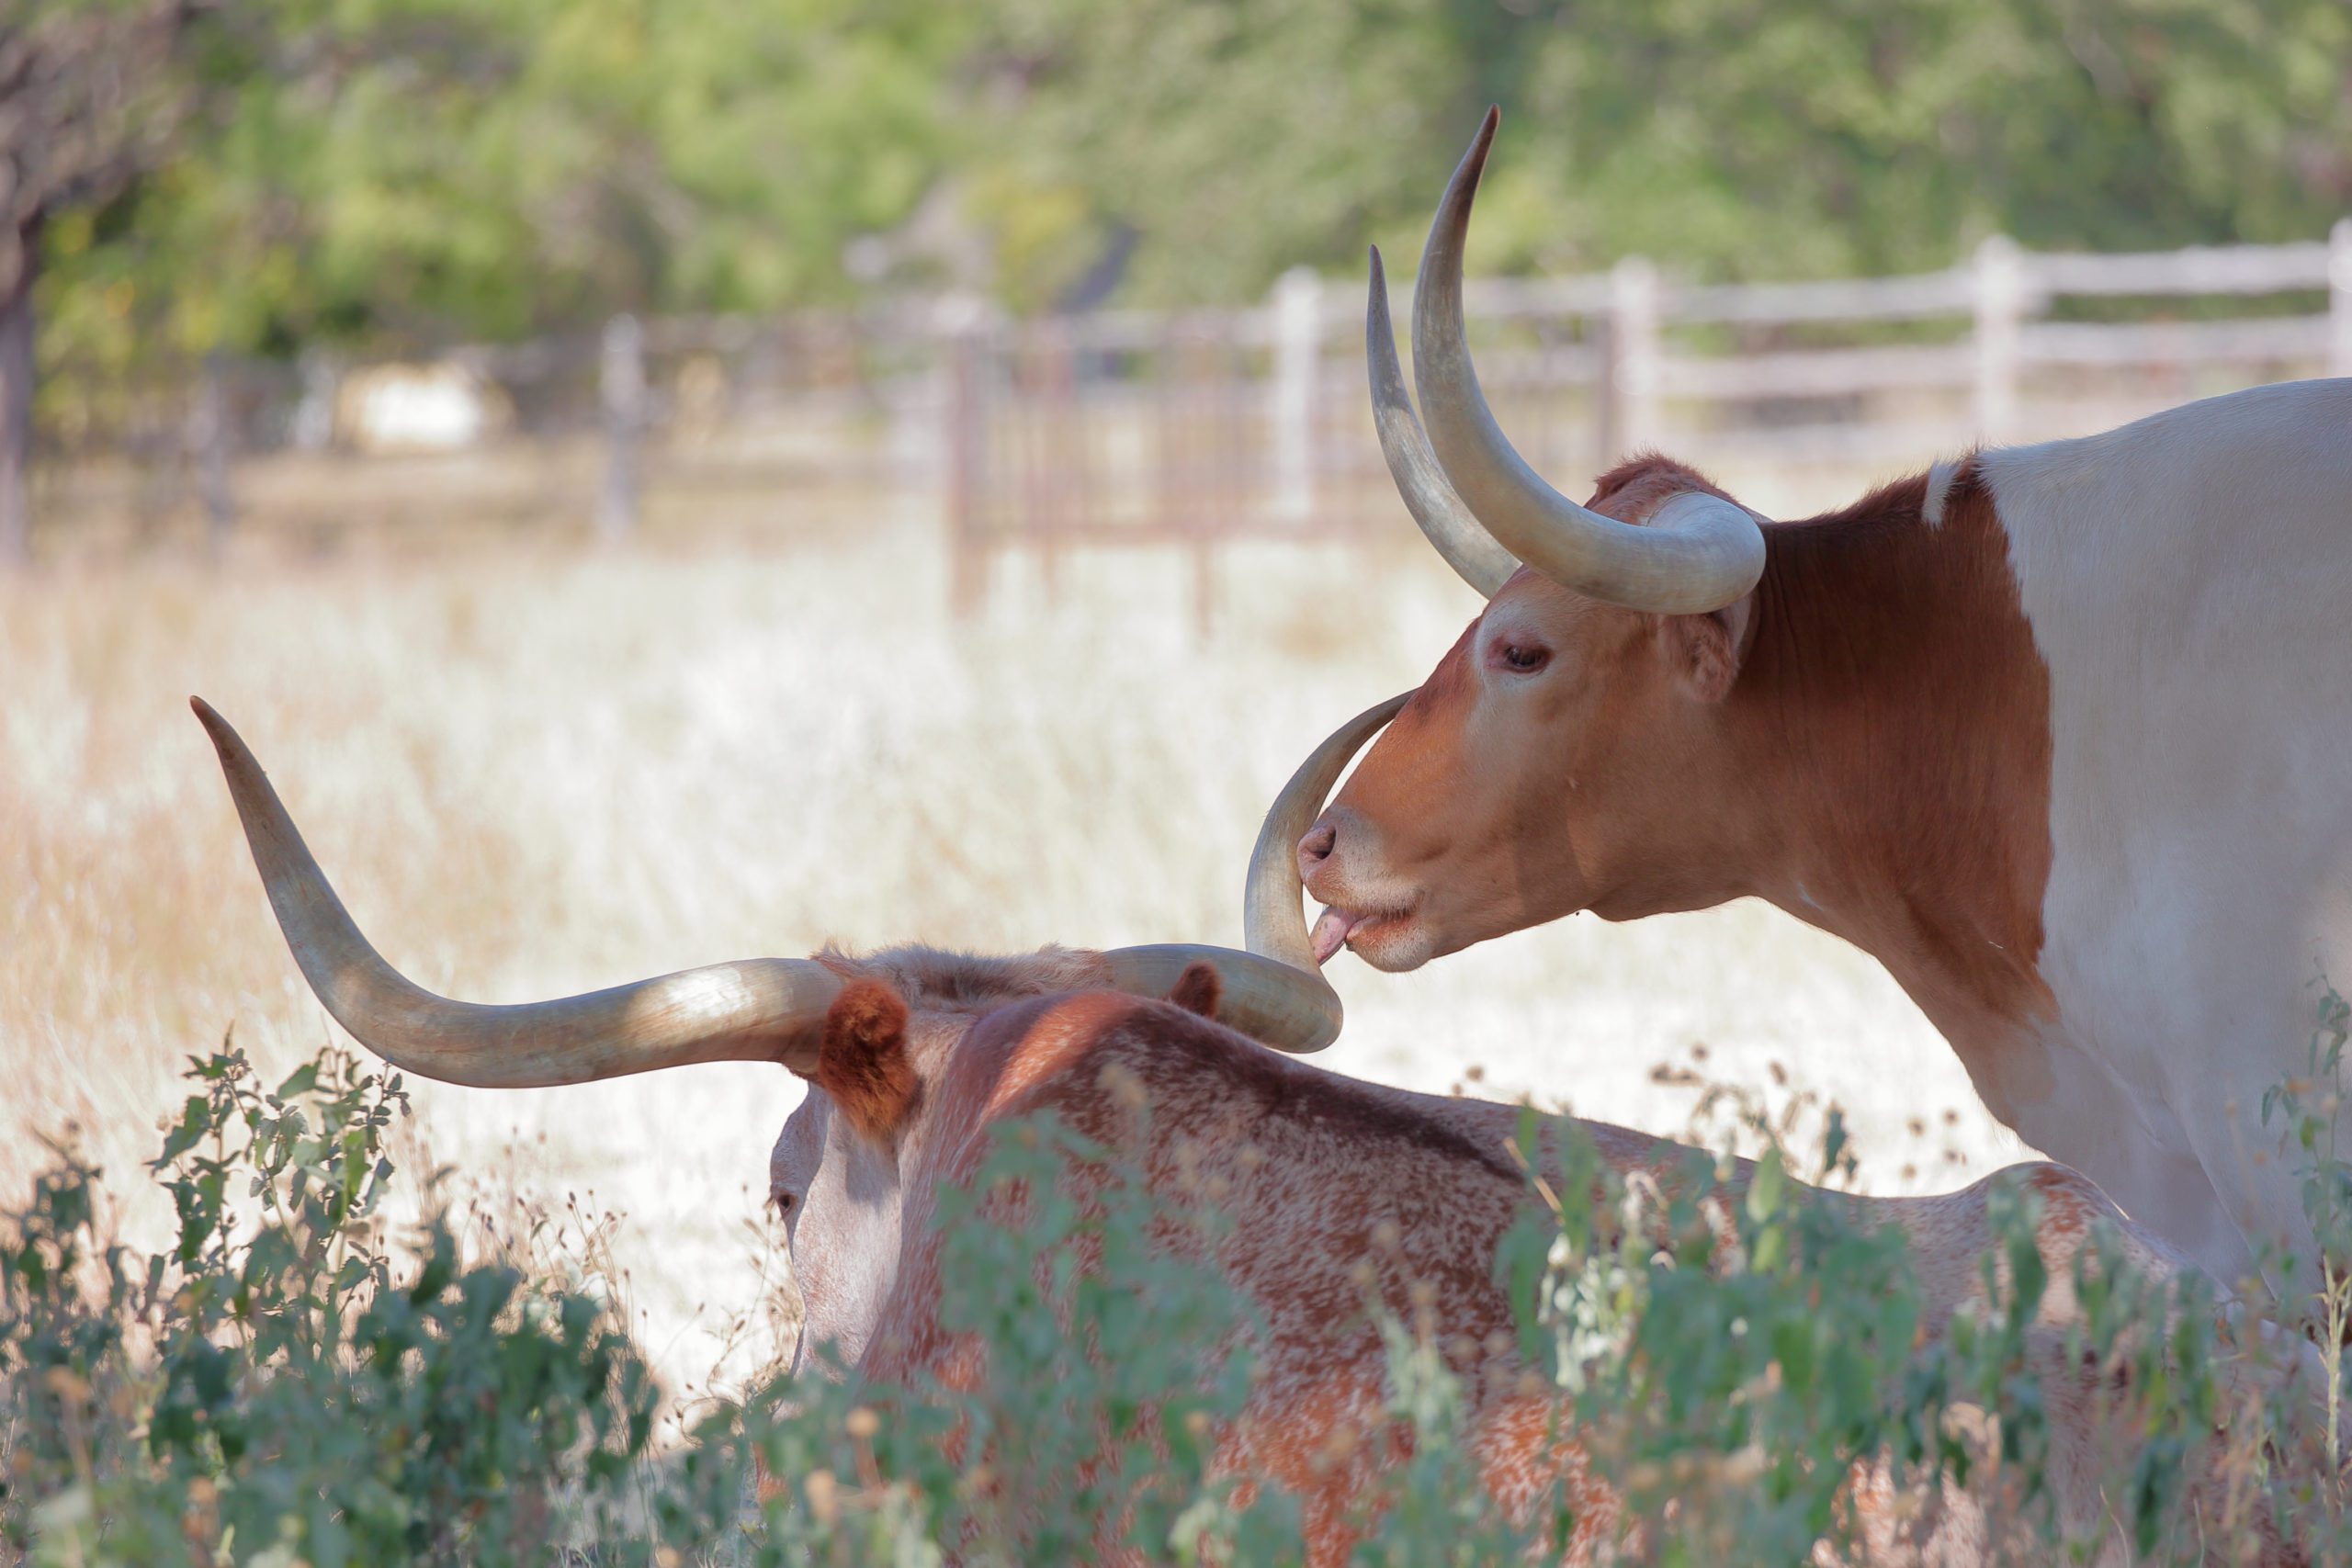 Texas Cattle Owners Forced to Sell Amid Extreme Heat, Drought